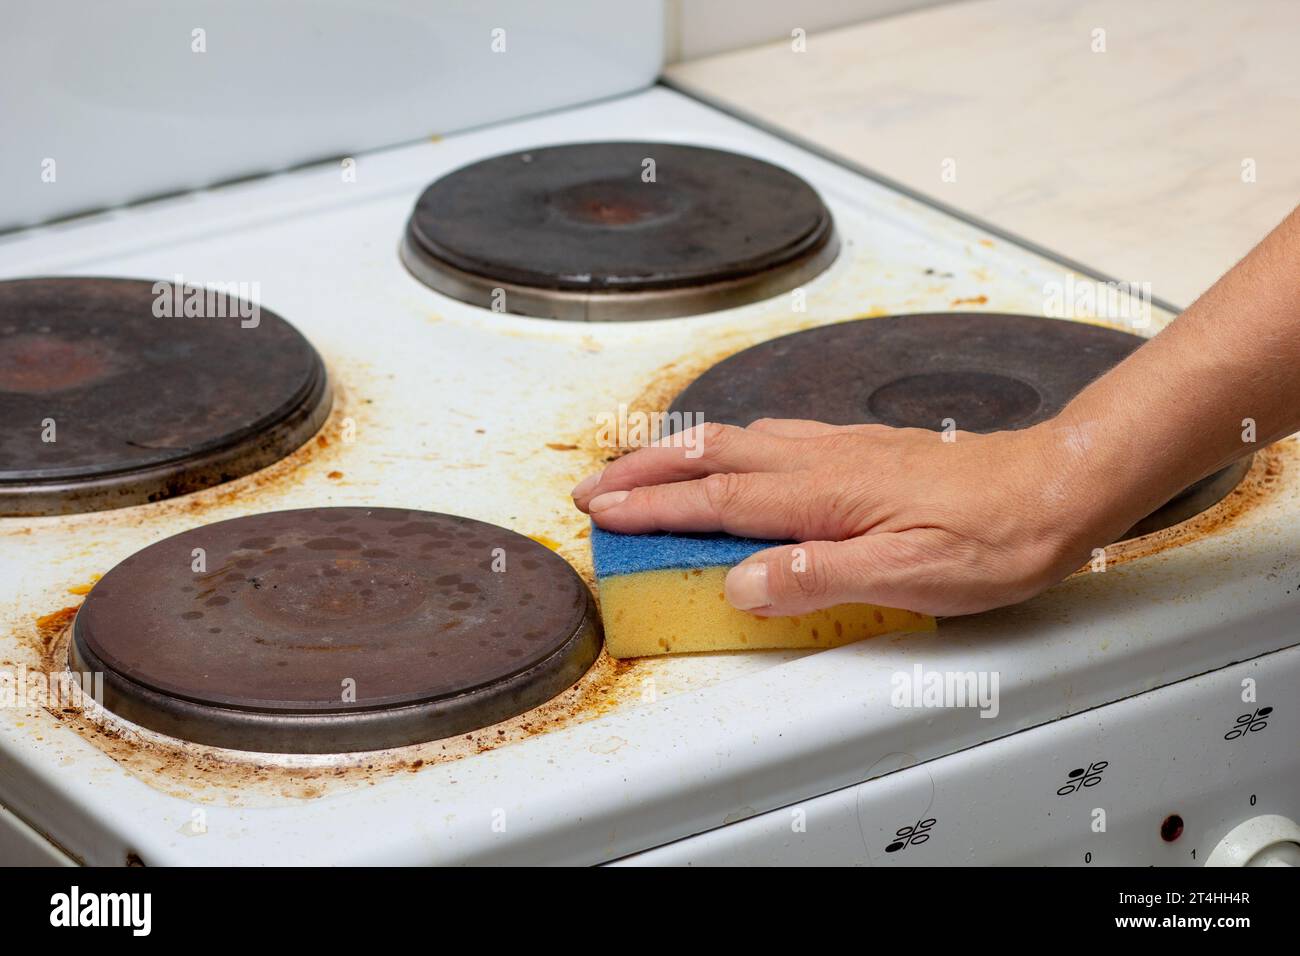 Woman hand remaining burnt stains on dirty white electric stove scrubbing using sponge Stock Photo